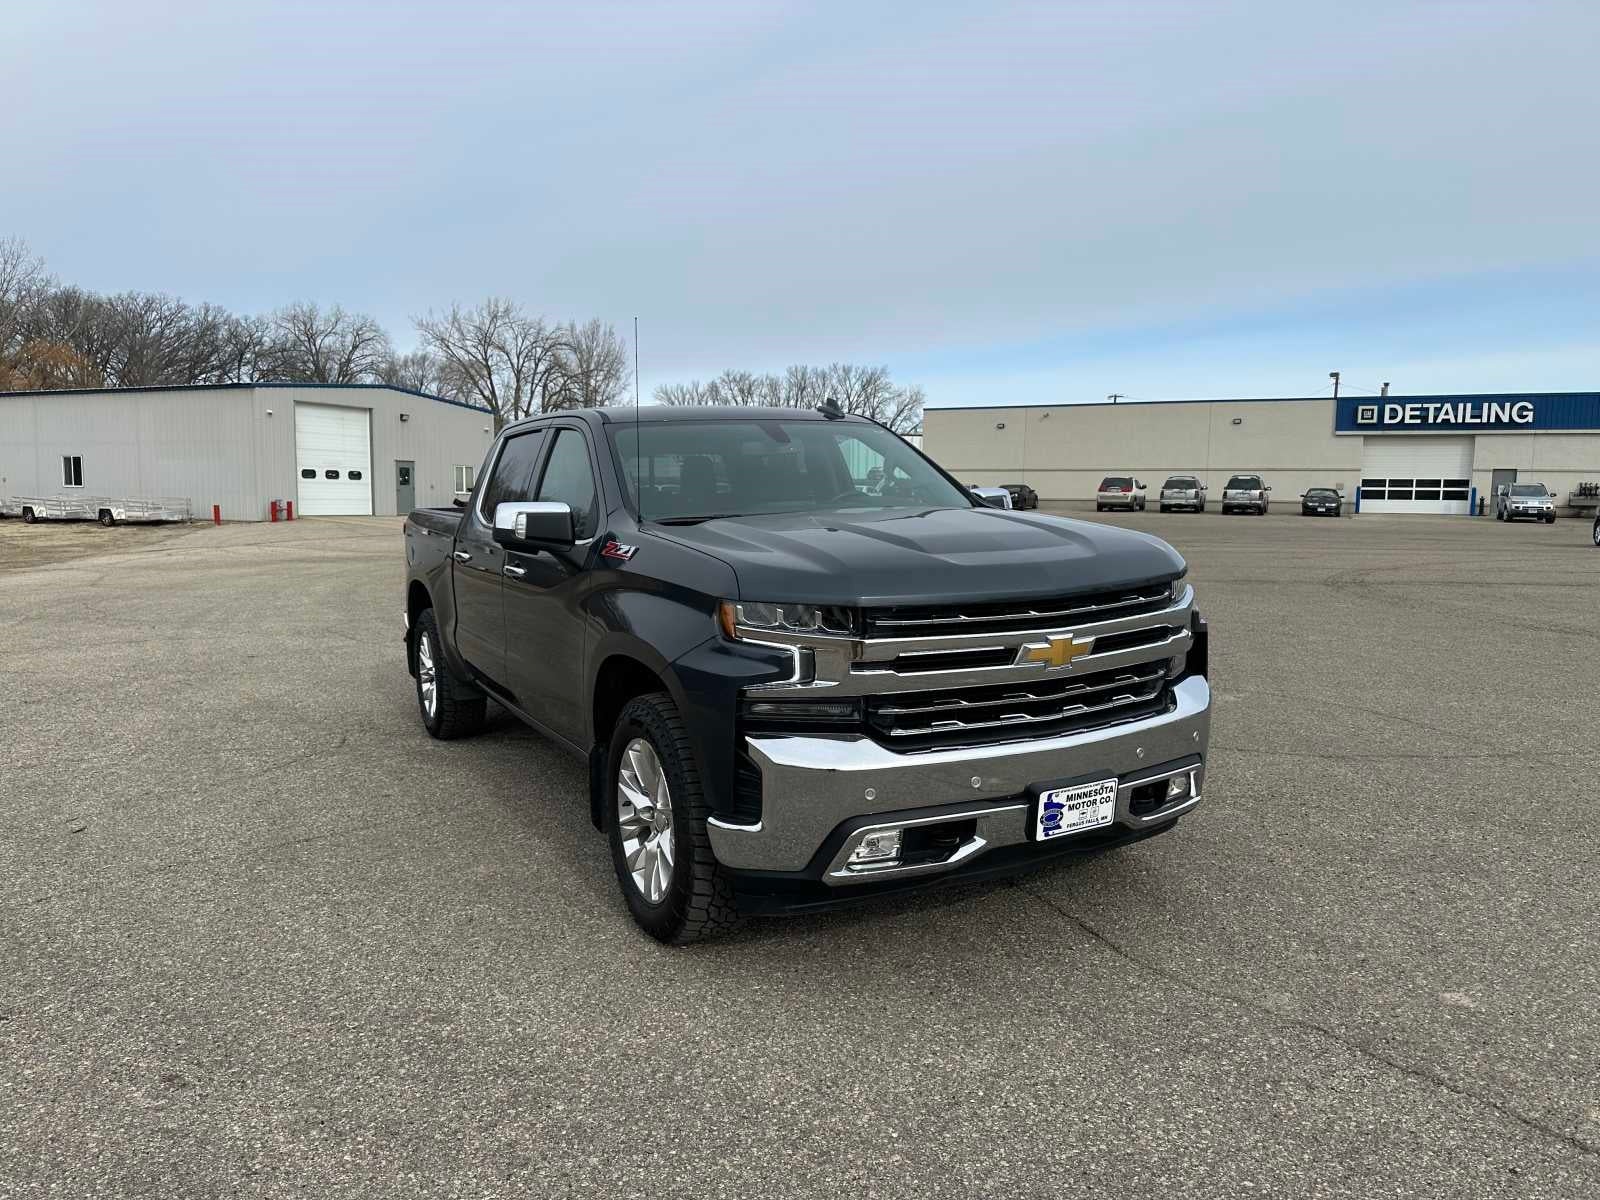 Used 2021 Chevrolet Silverado 1500 LTZ with VIN 3GCUYGED1MG167466 for sale in Fergus Falls, Minnesota